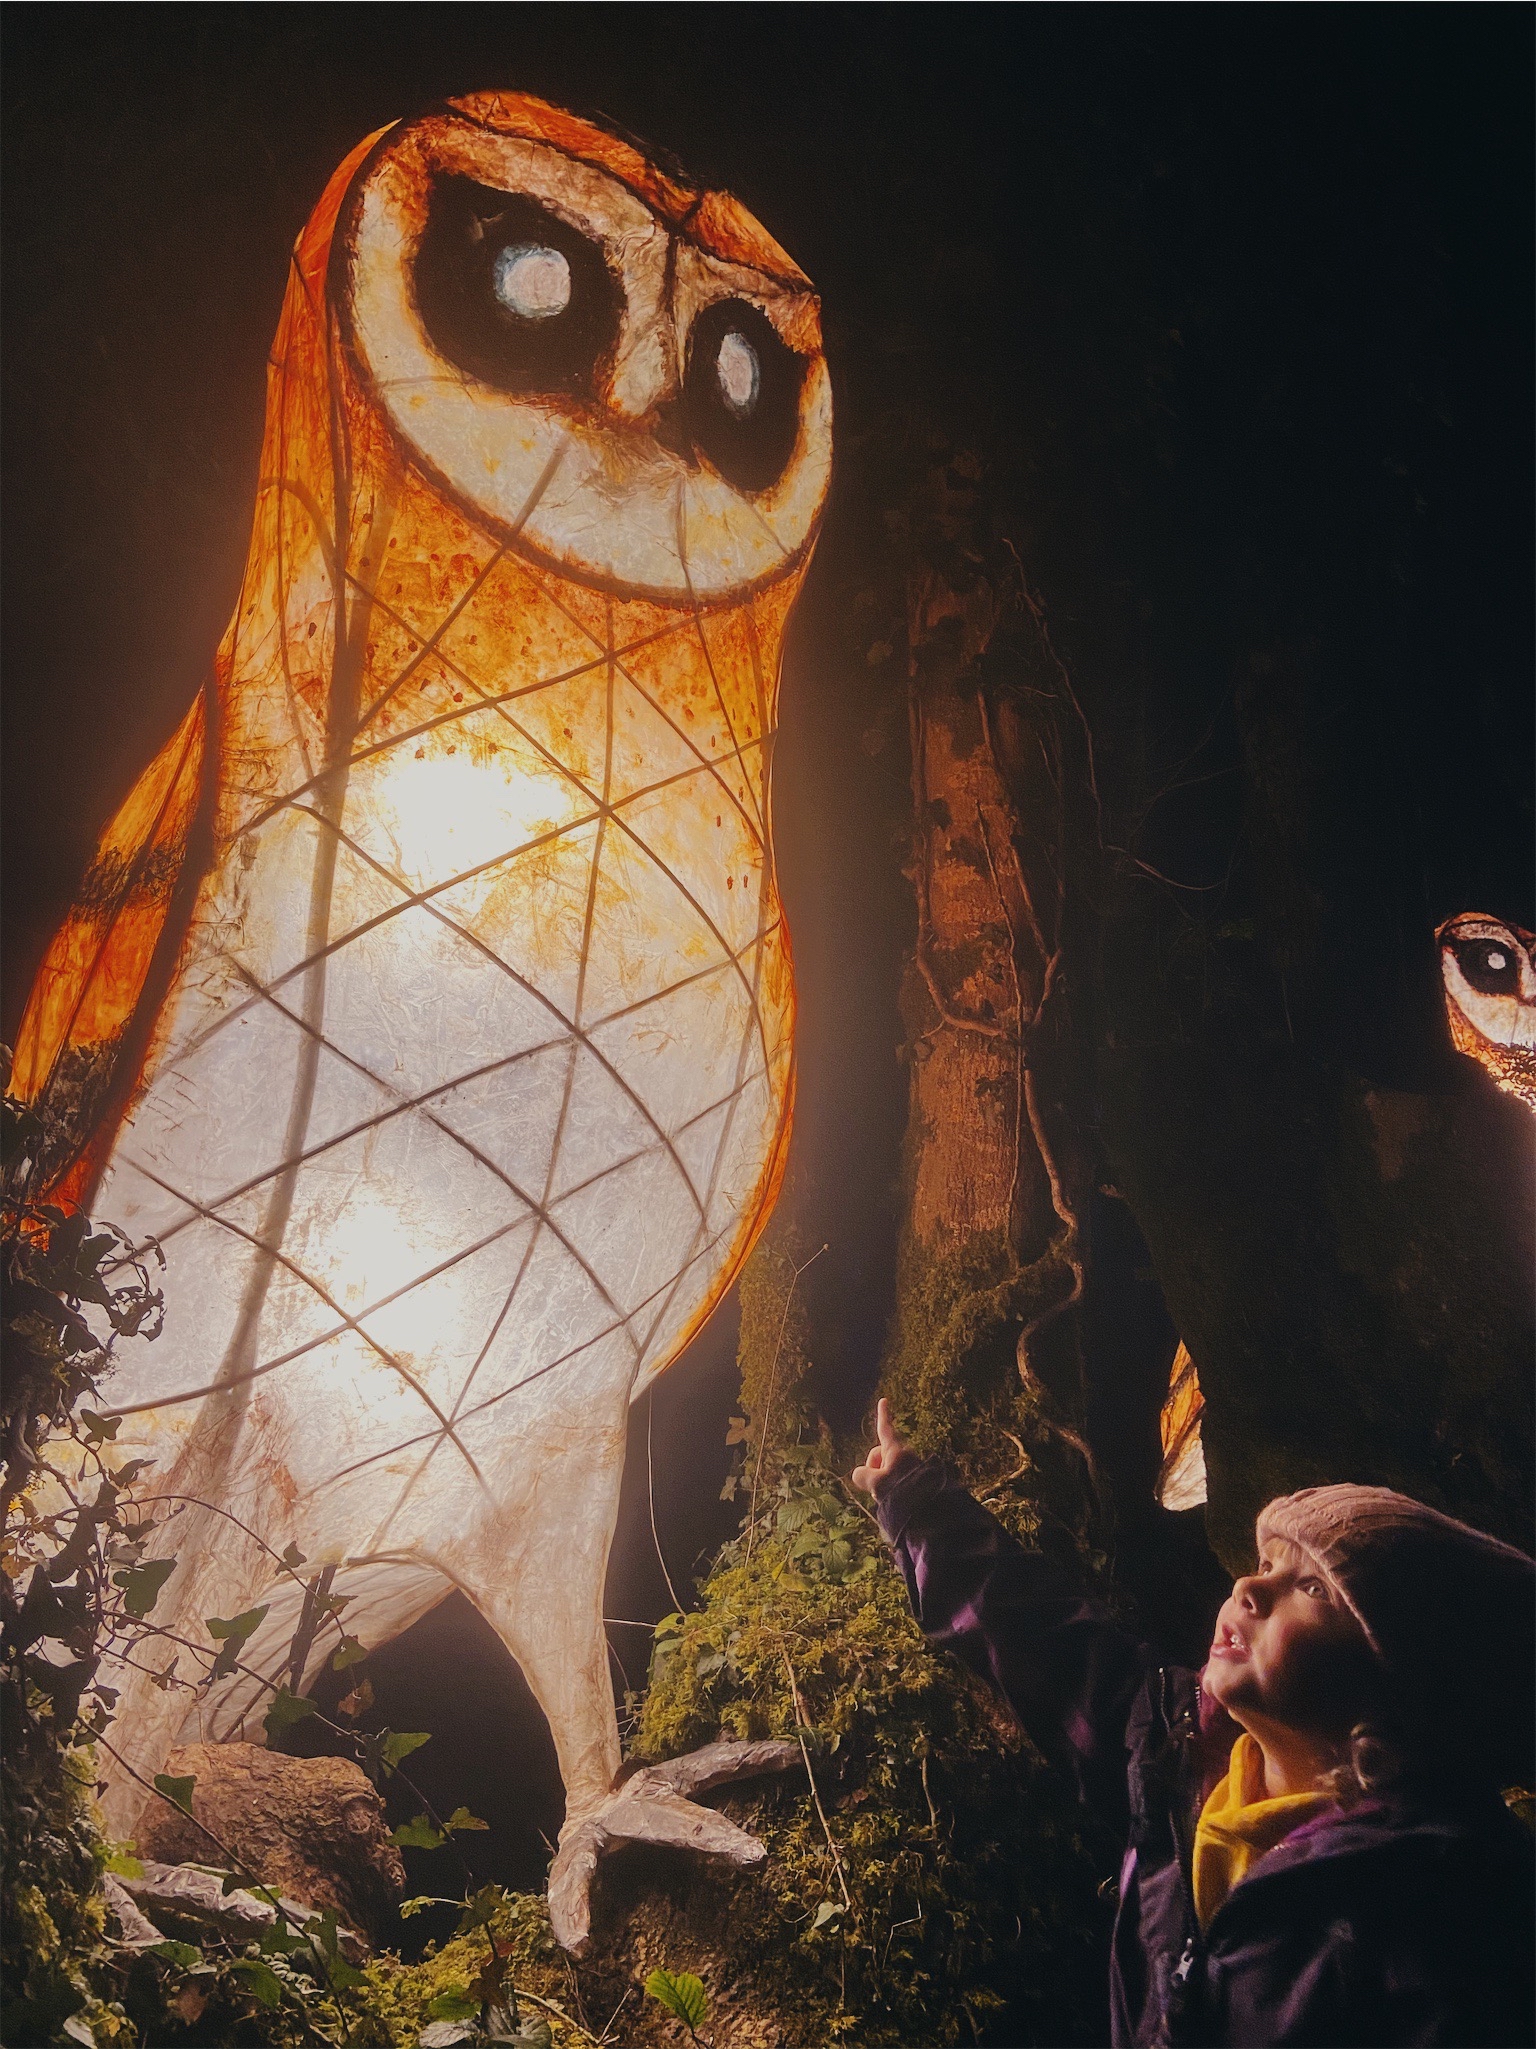 A little girl points to a huge illuminated owl in a dark wood